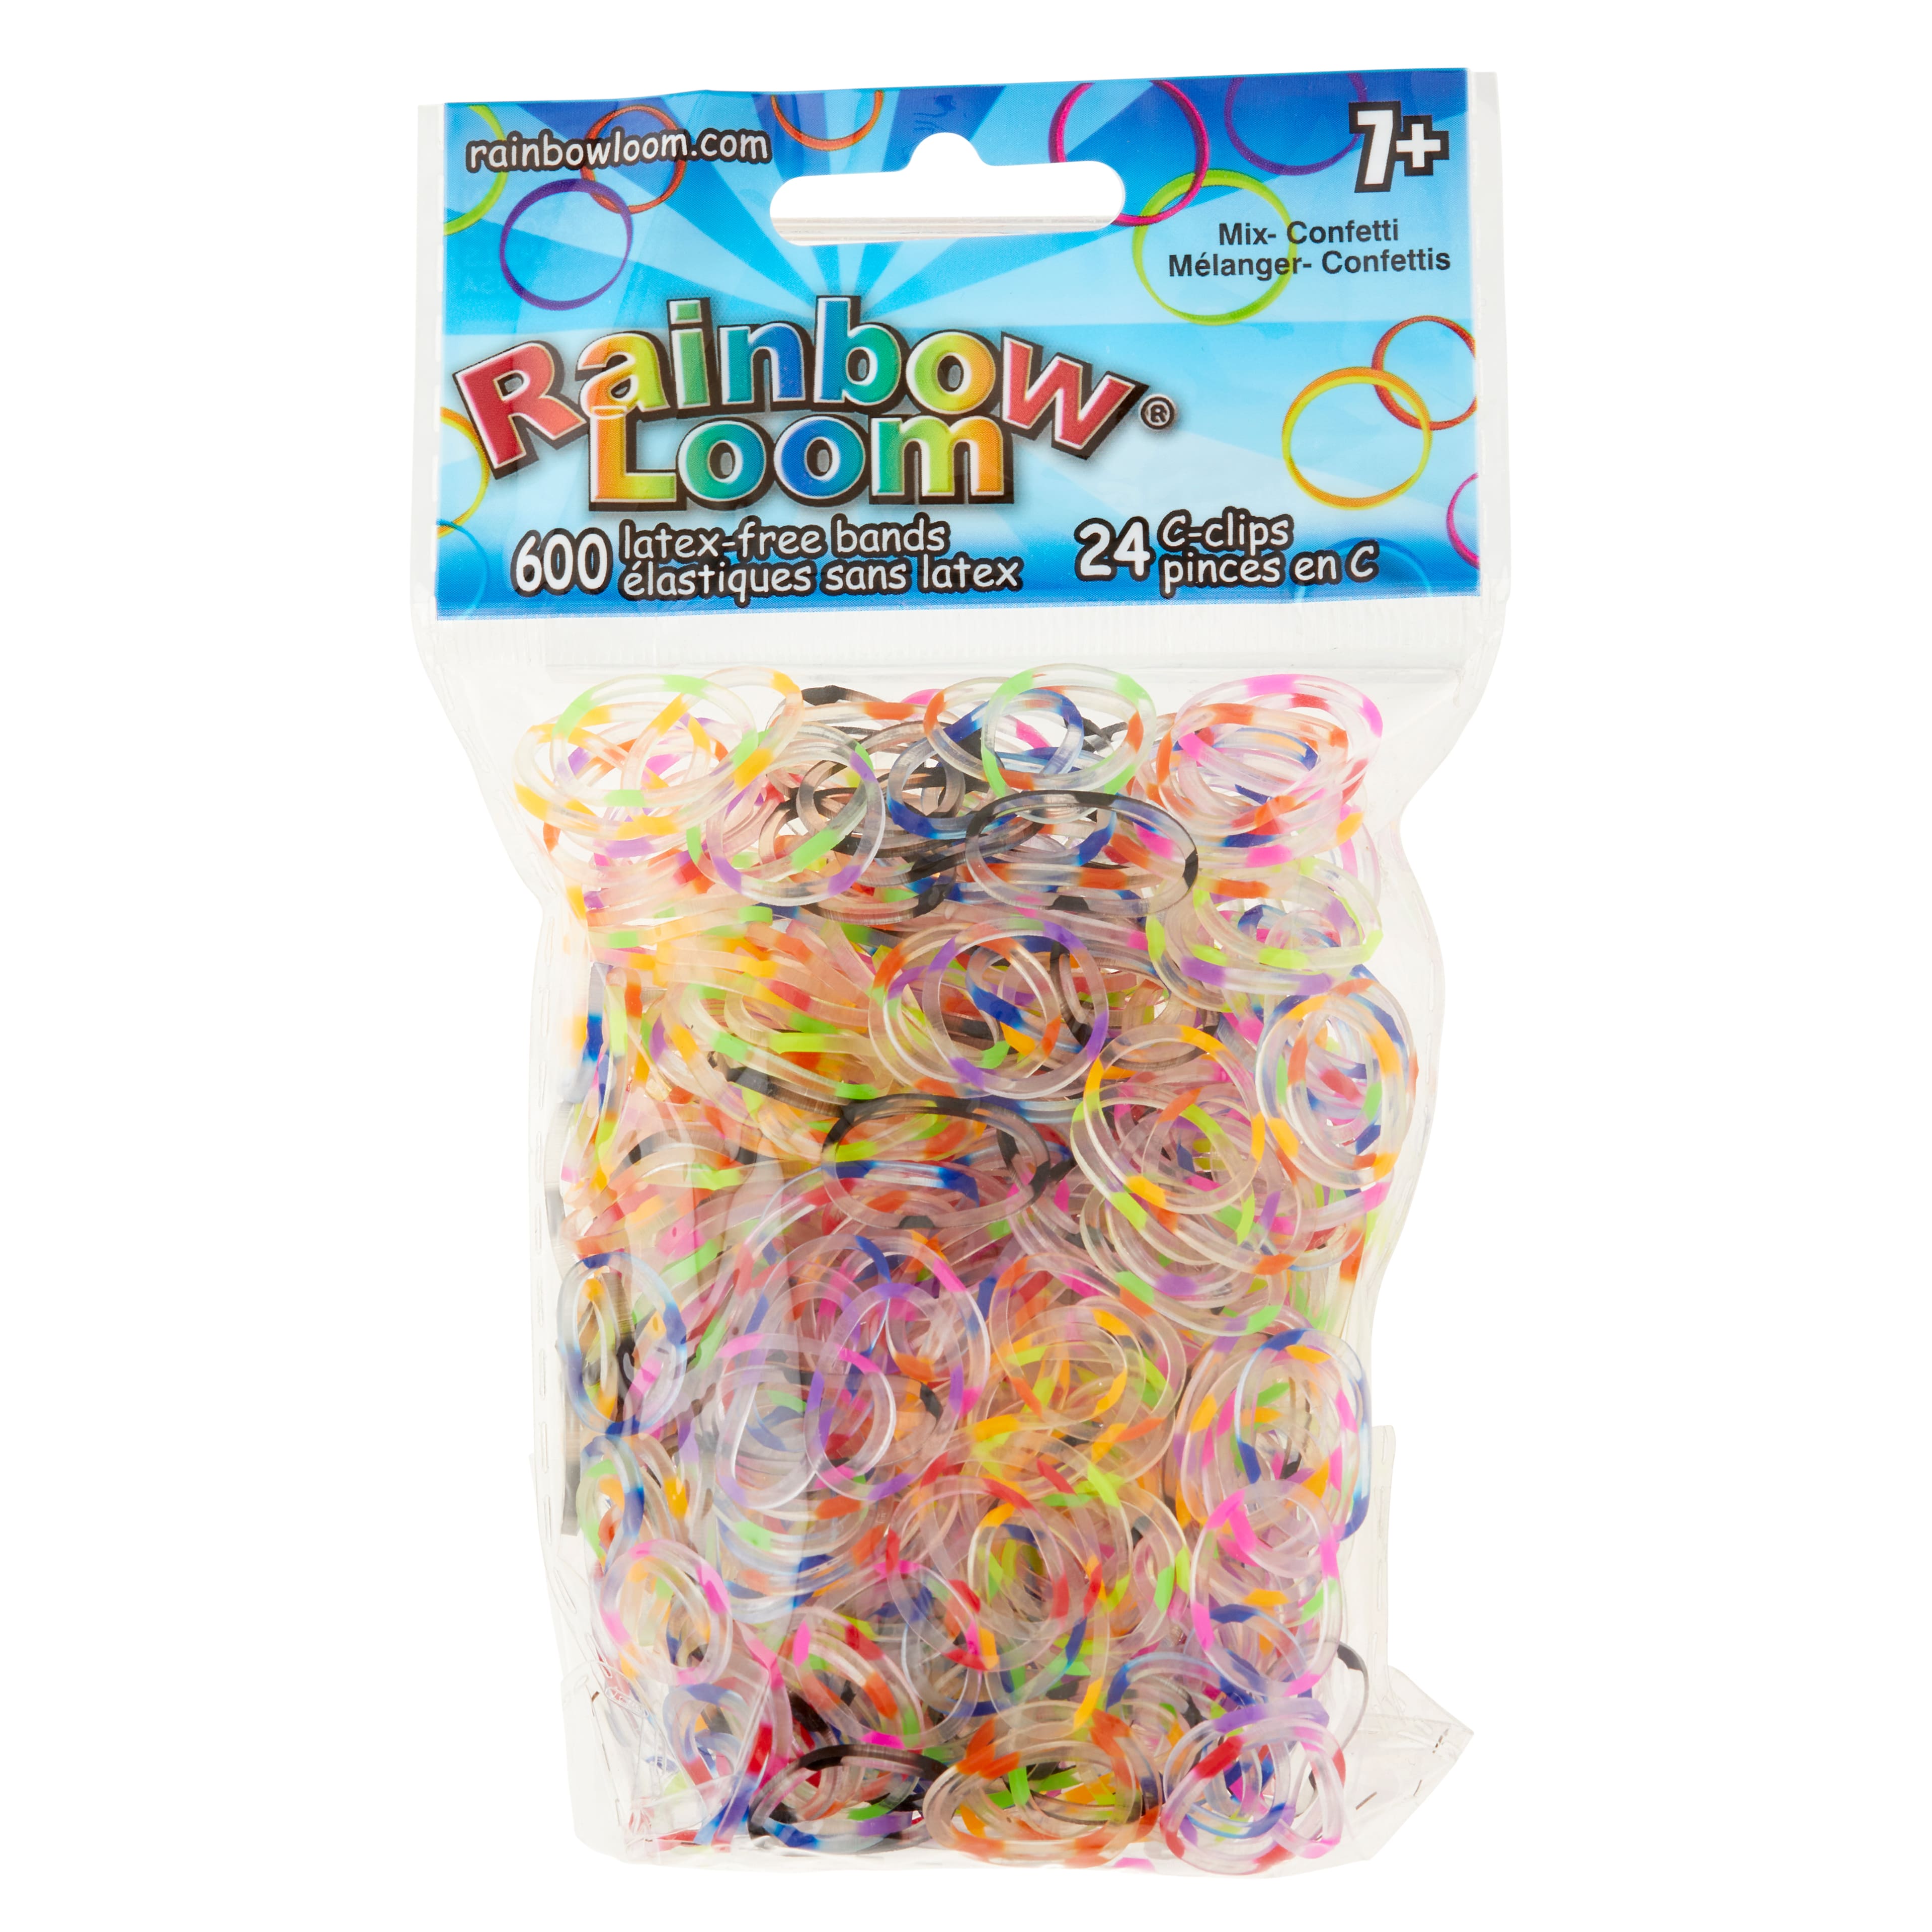 Rainbow Loom Refill Bands: Glow Fire Flies - Wit & Whimsy Toys